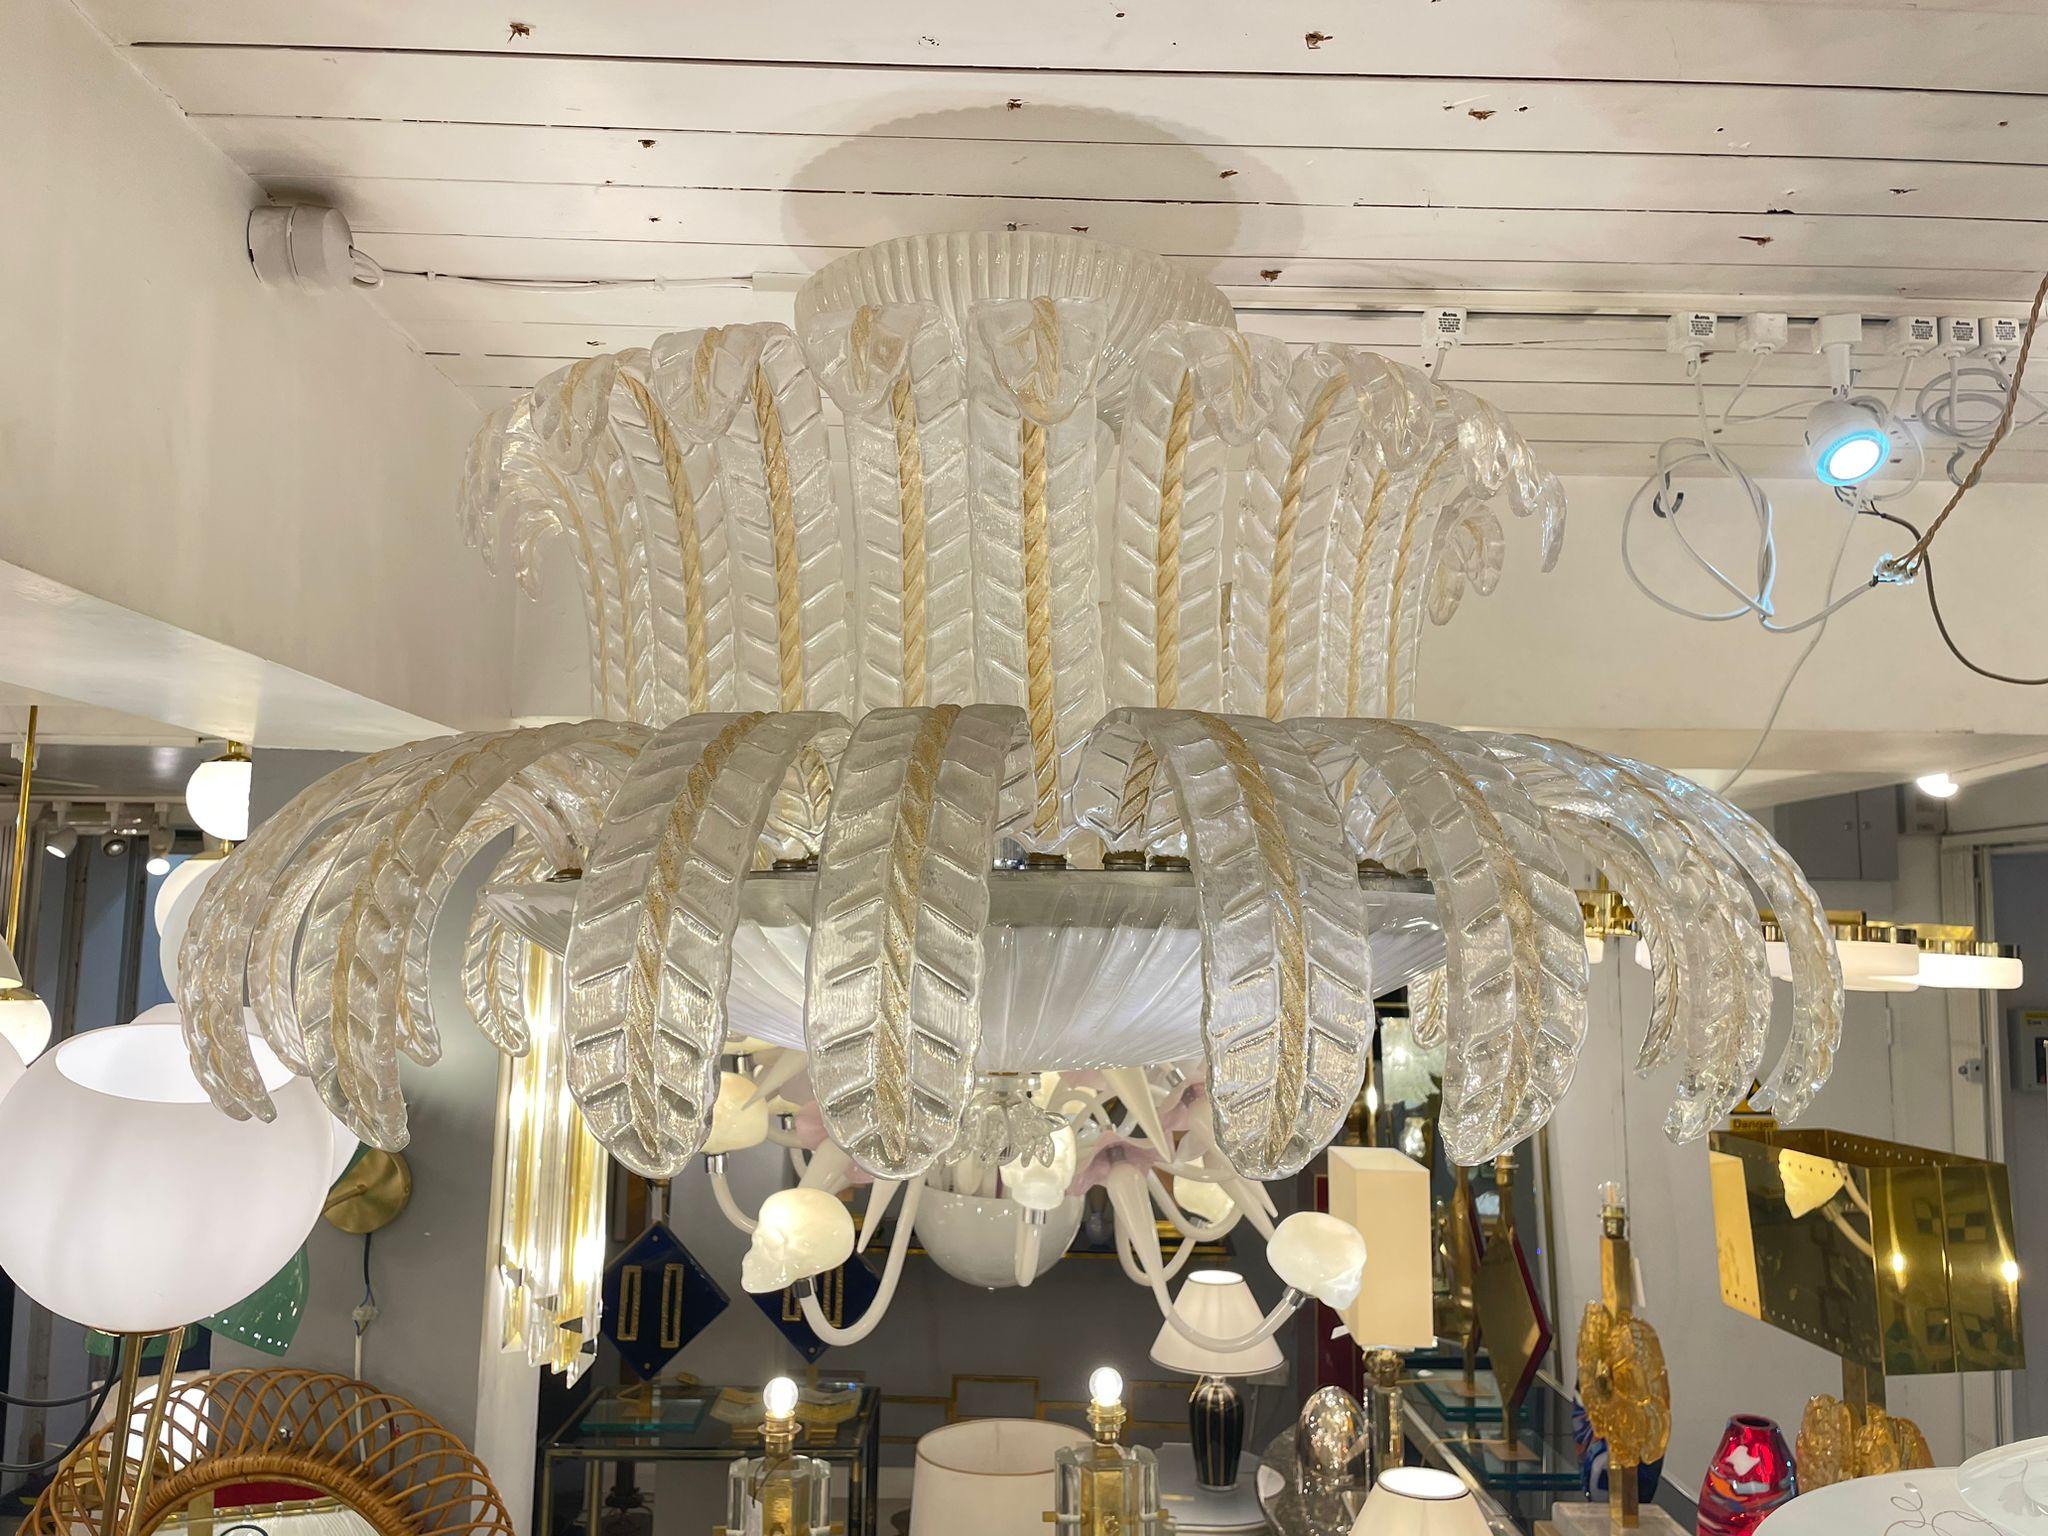 Stunning  oversized chandeliers with leaves in Murano glass and gold inclusions attributed to Barovier & Toso.